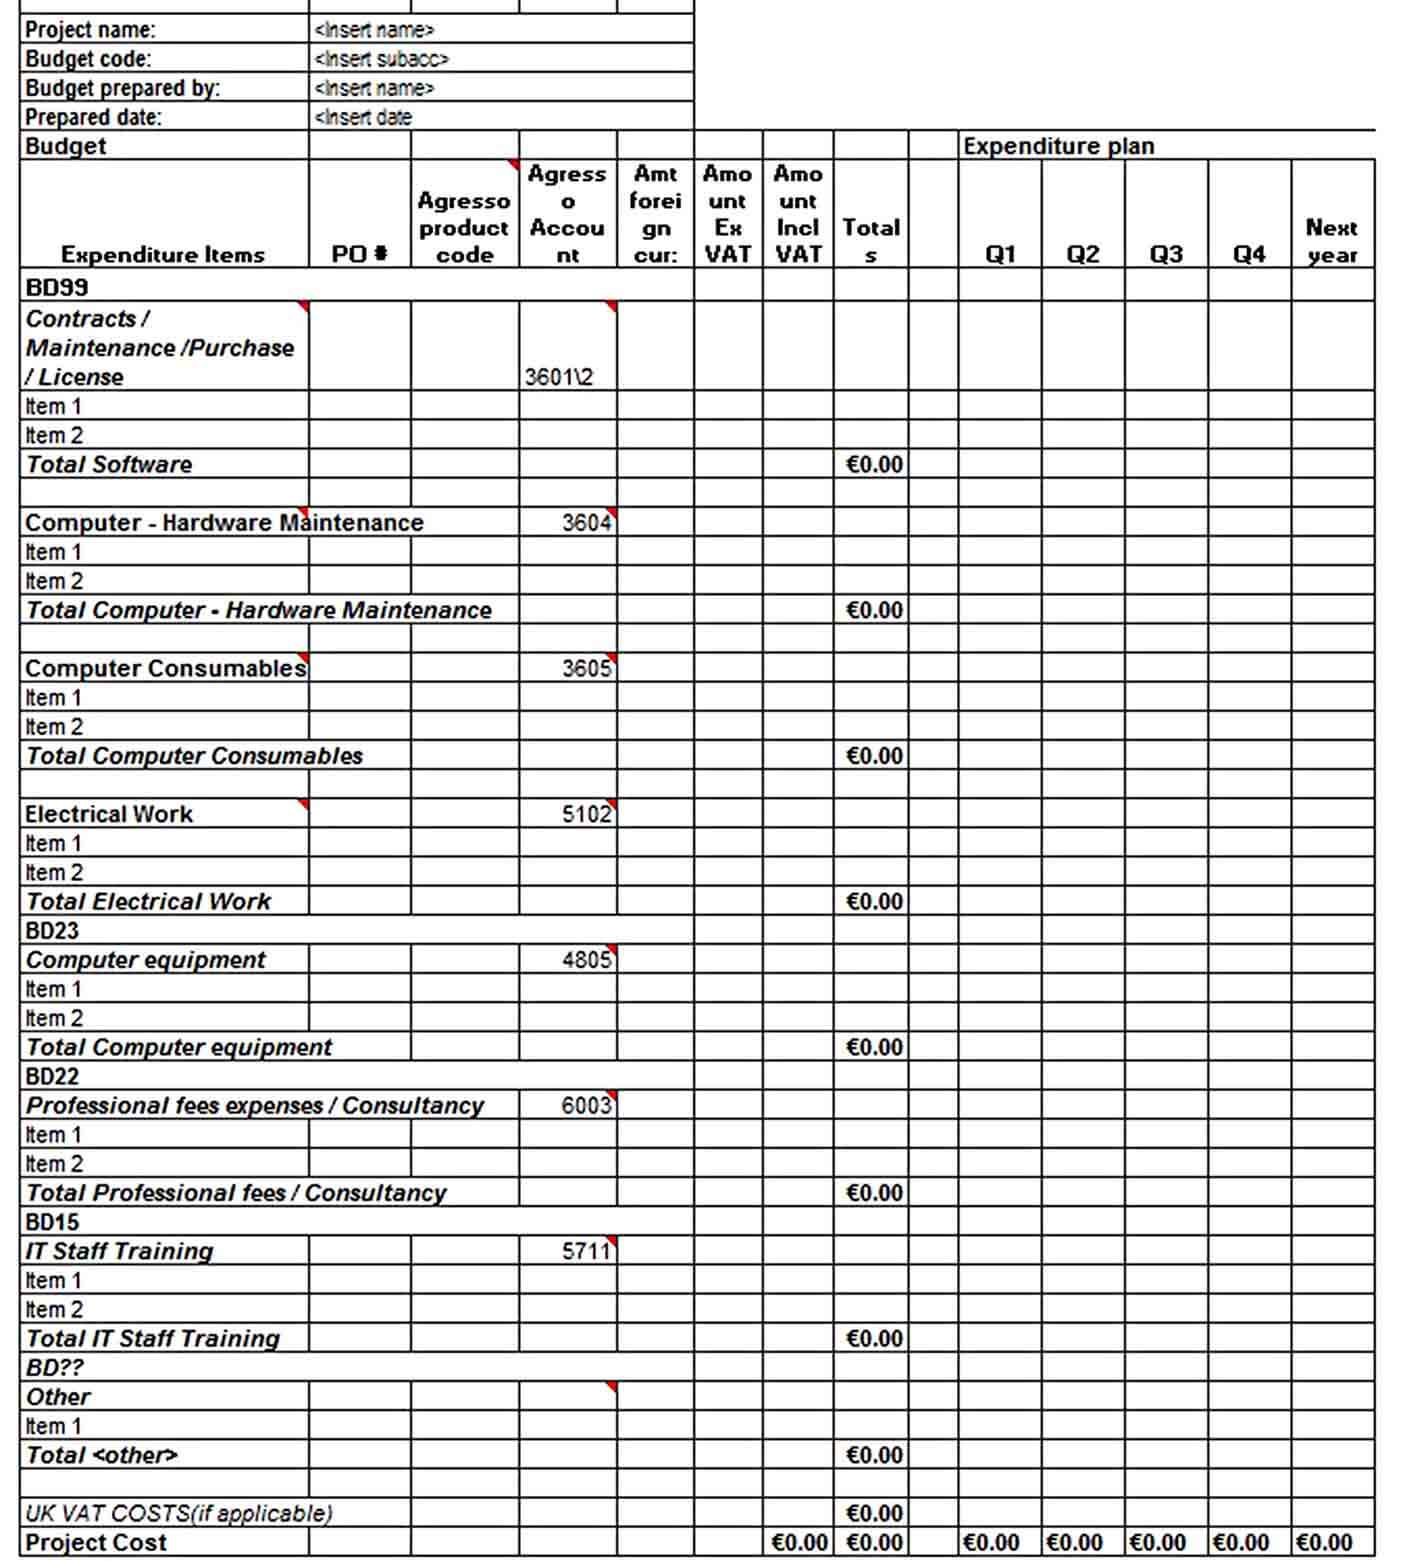 PMO Budget expenditure template